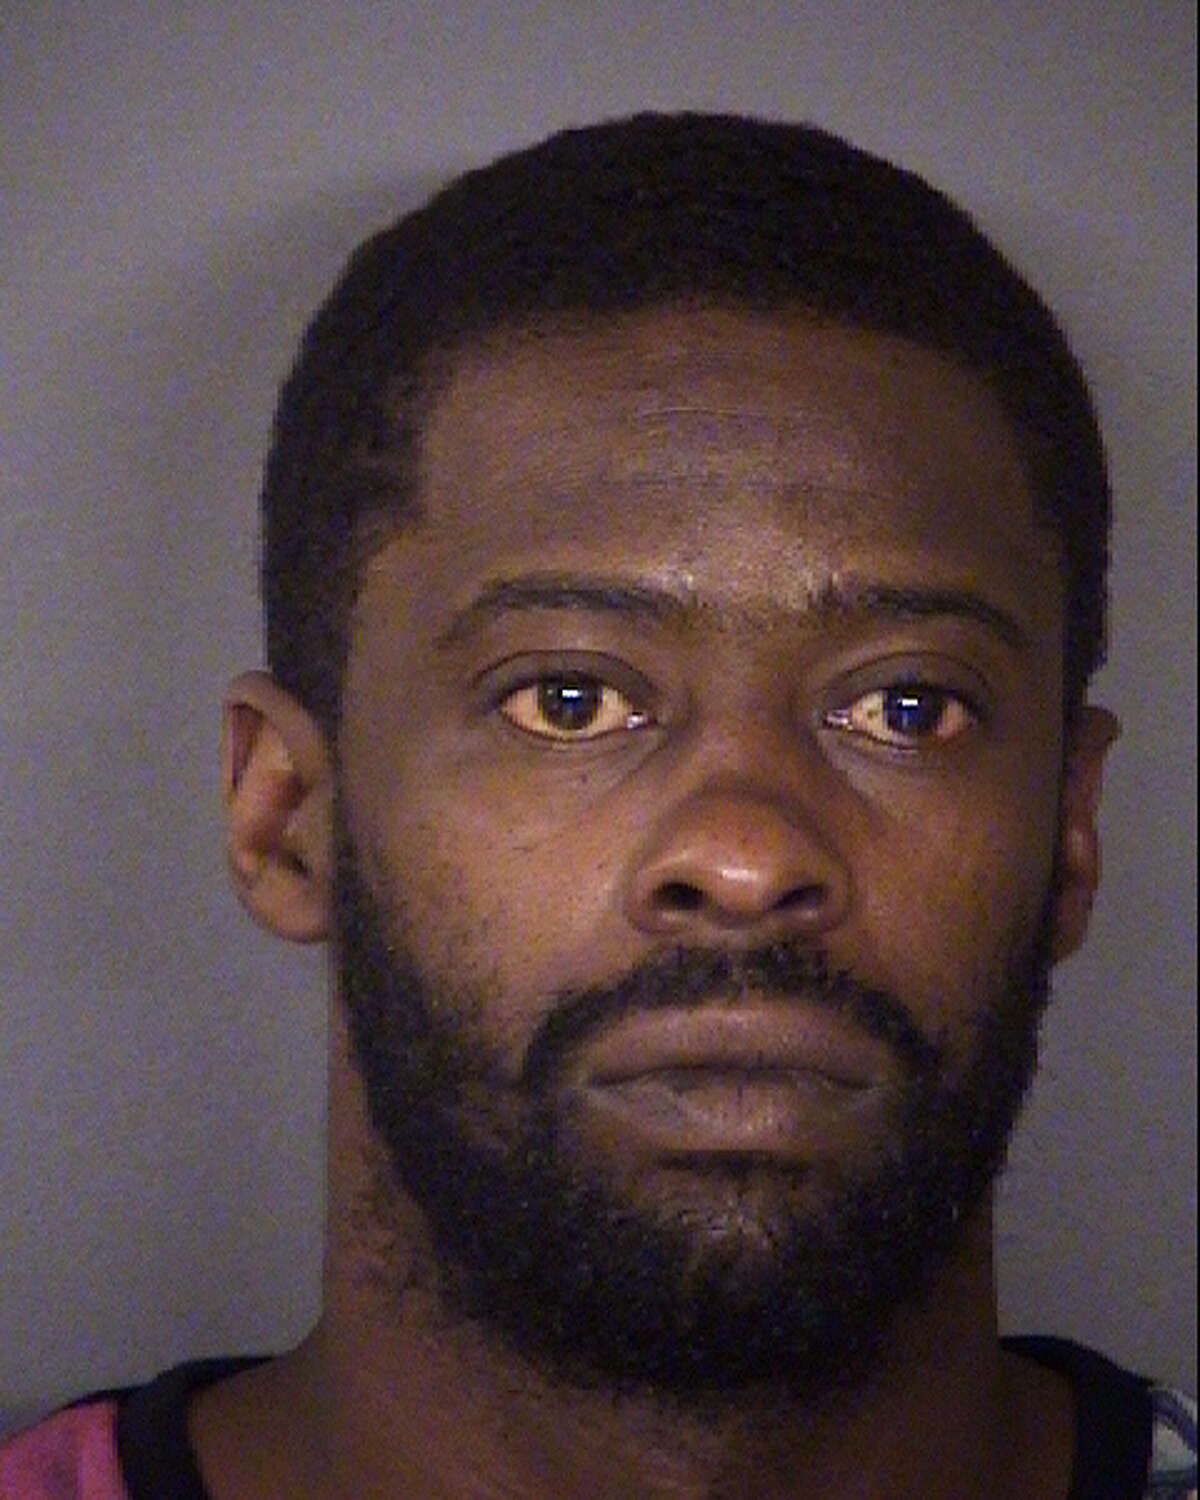 Deandre Dorch faces charges of injury to a child, according to the Bexar County sheriff's Office,